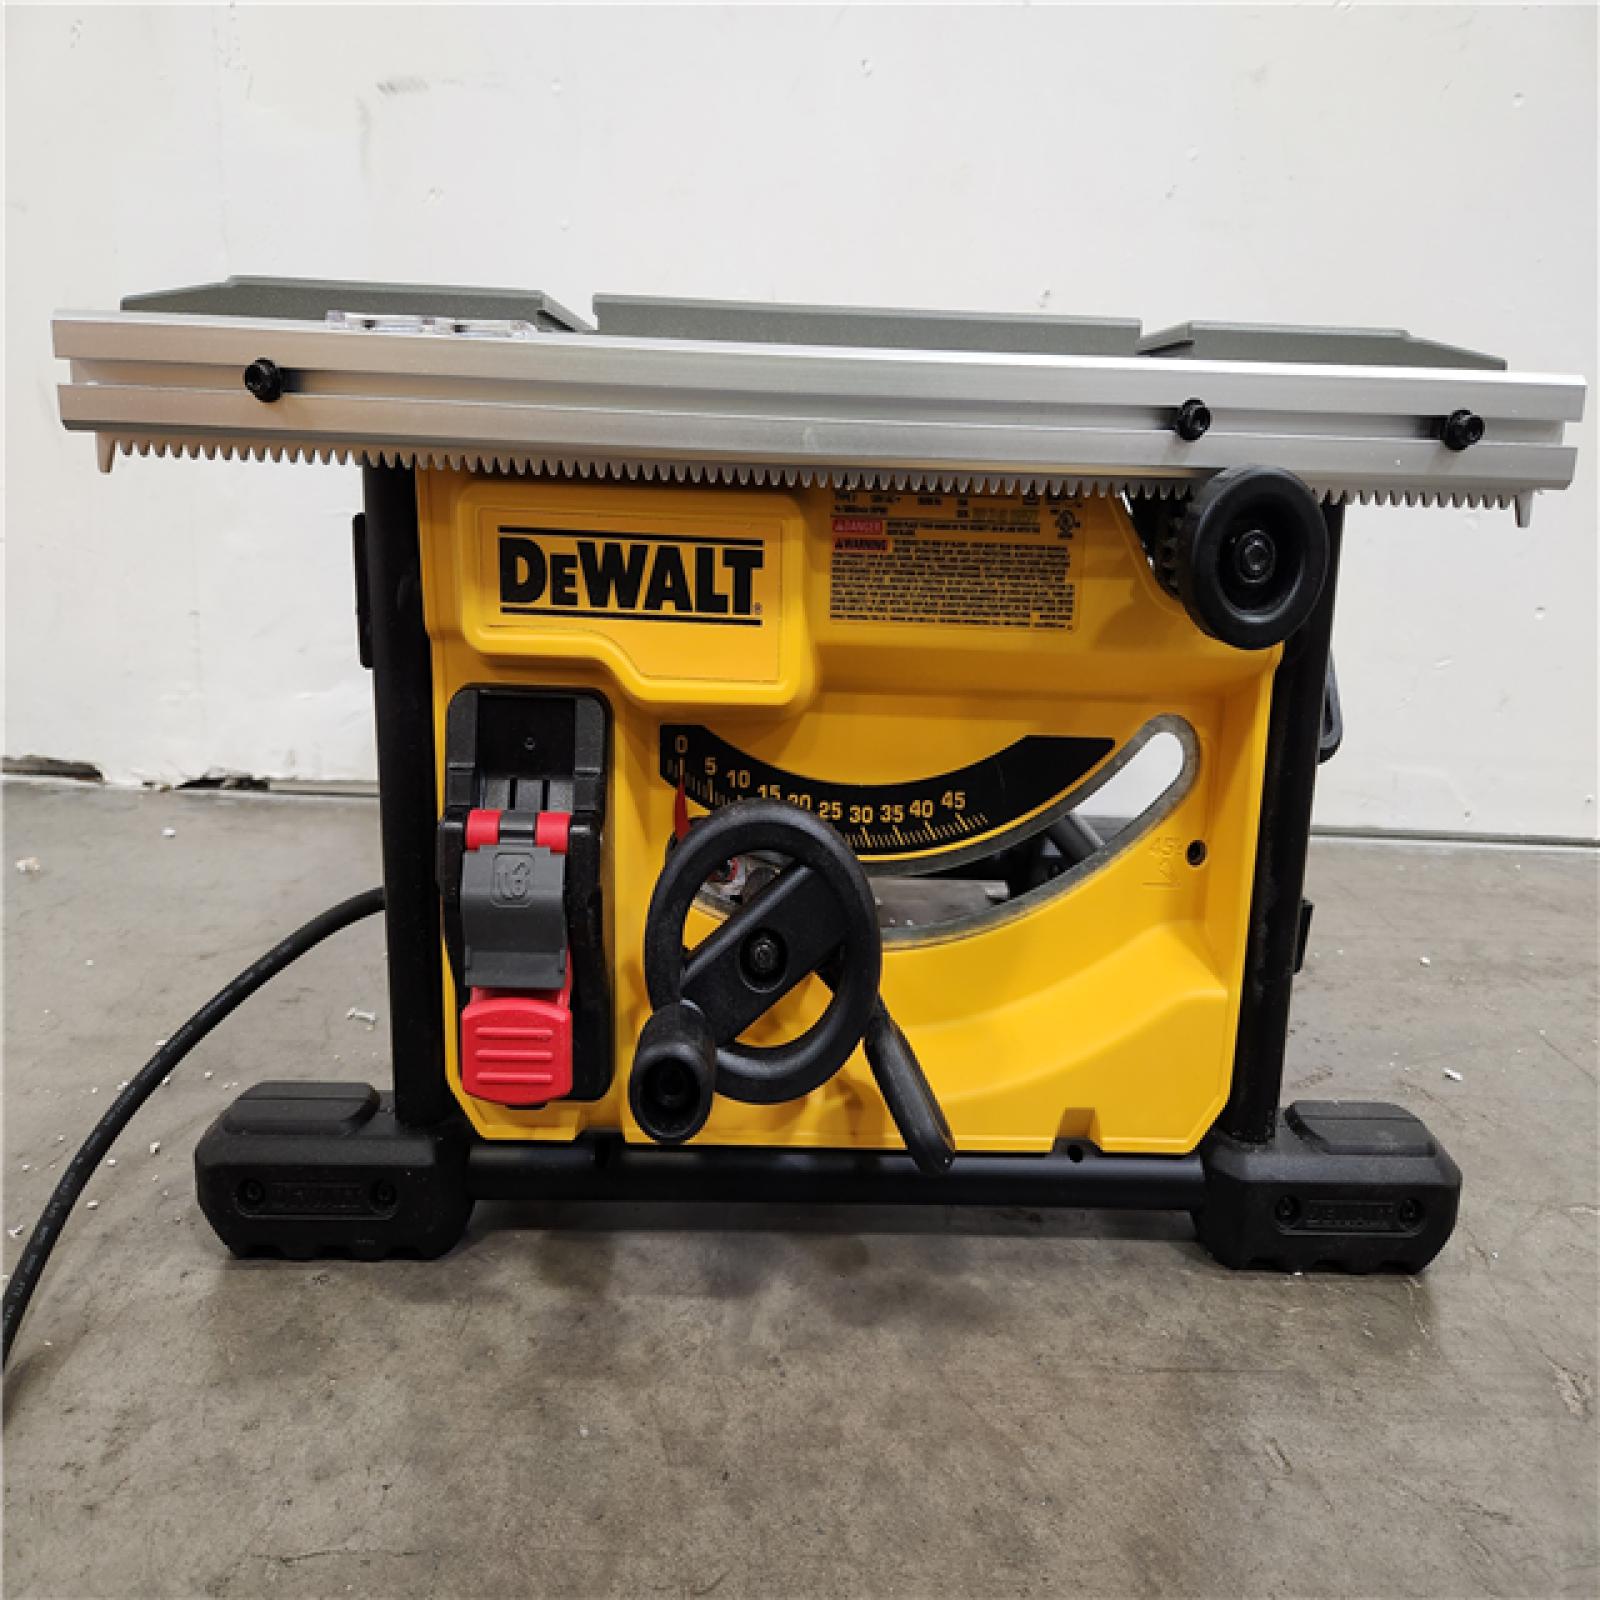 Phoenix Location NEW  DEWALT 15 Amp Corded 8-1/4 in. Compact Portable Jobsite Tablesaw (Stand Not Included)